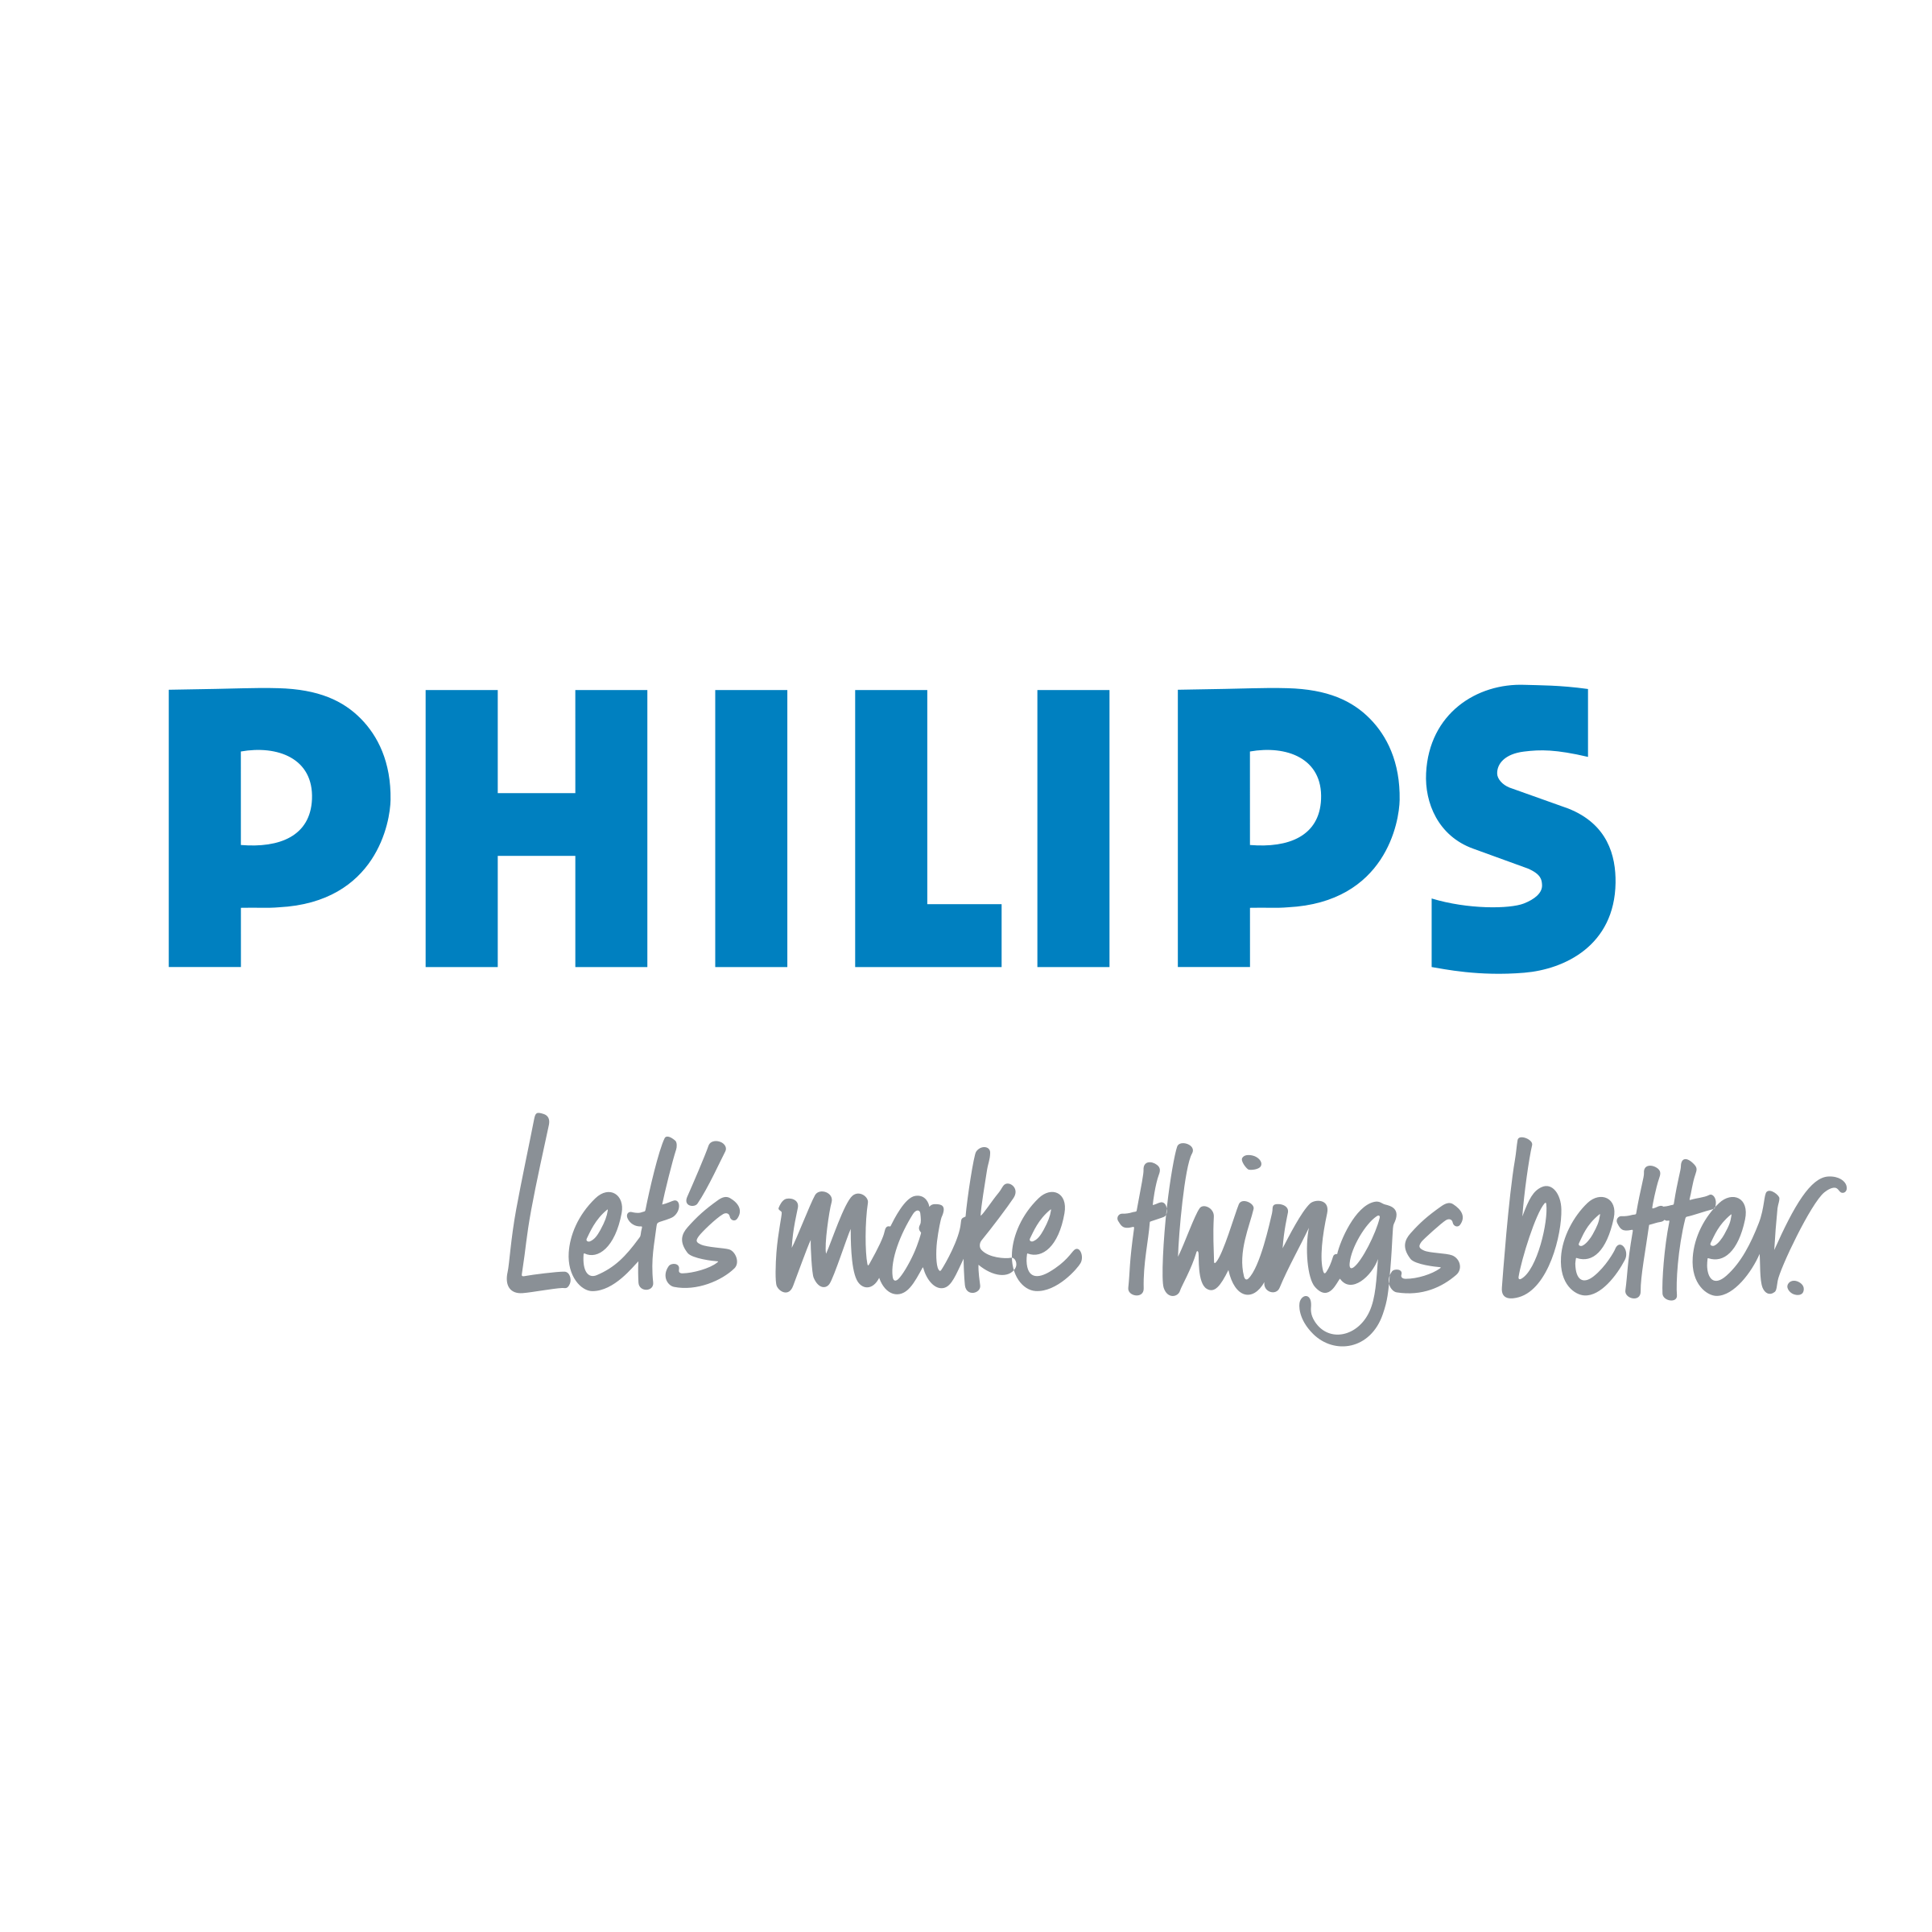 Philips – Logos, Brands And